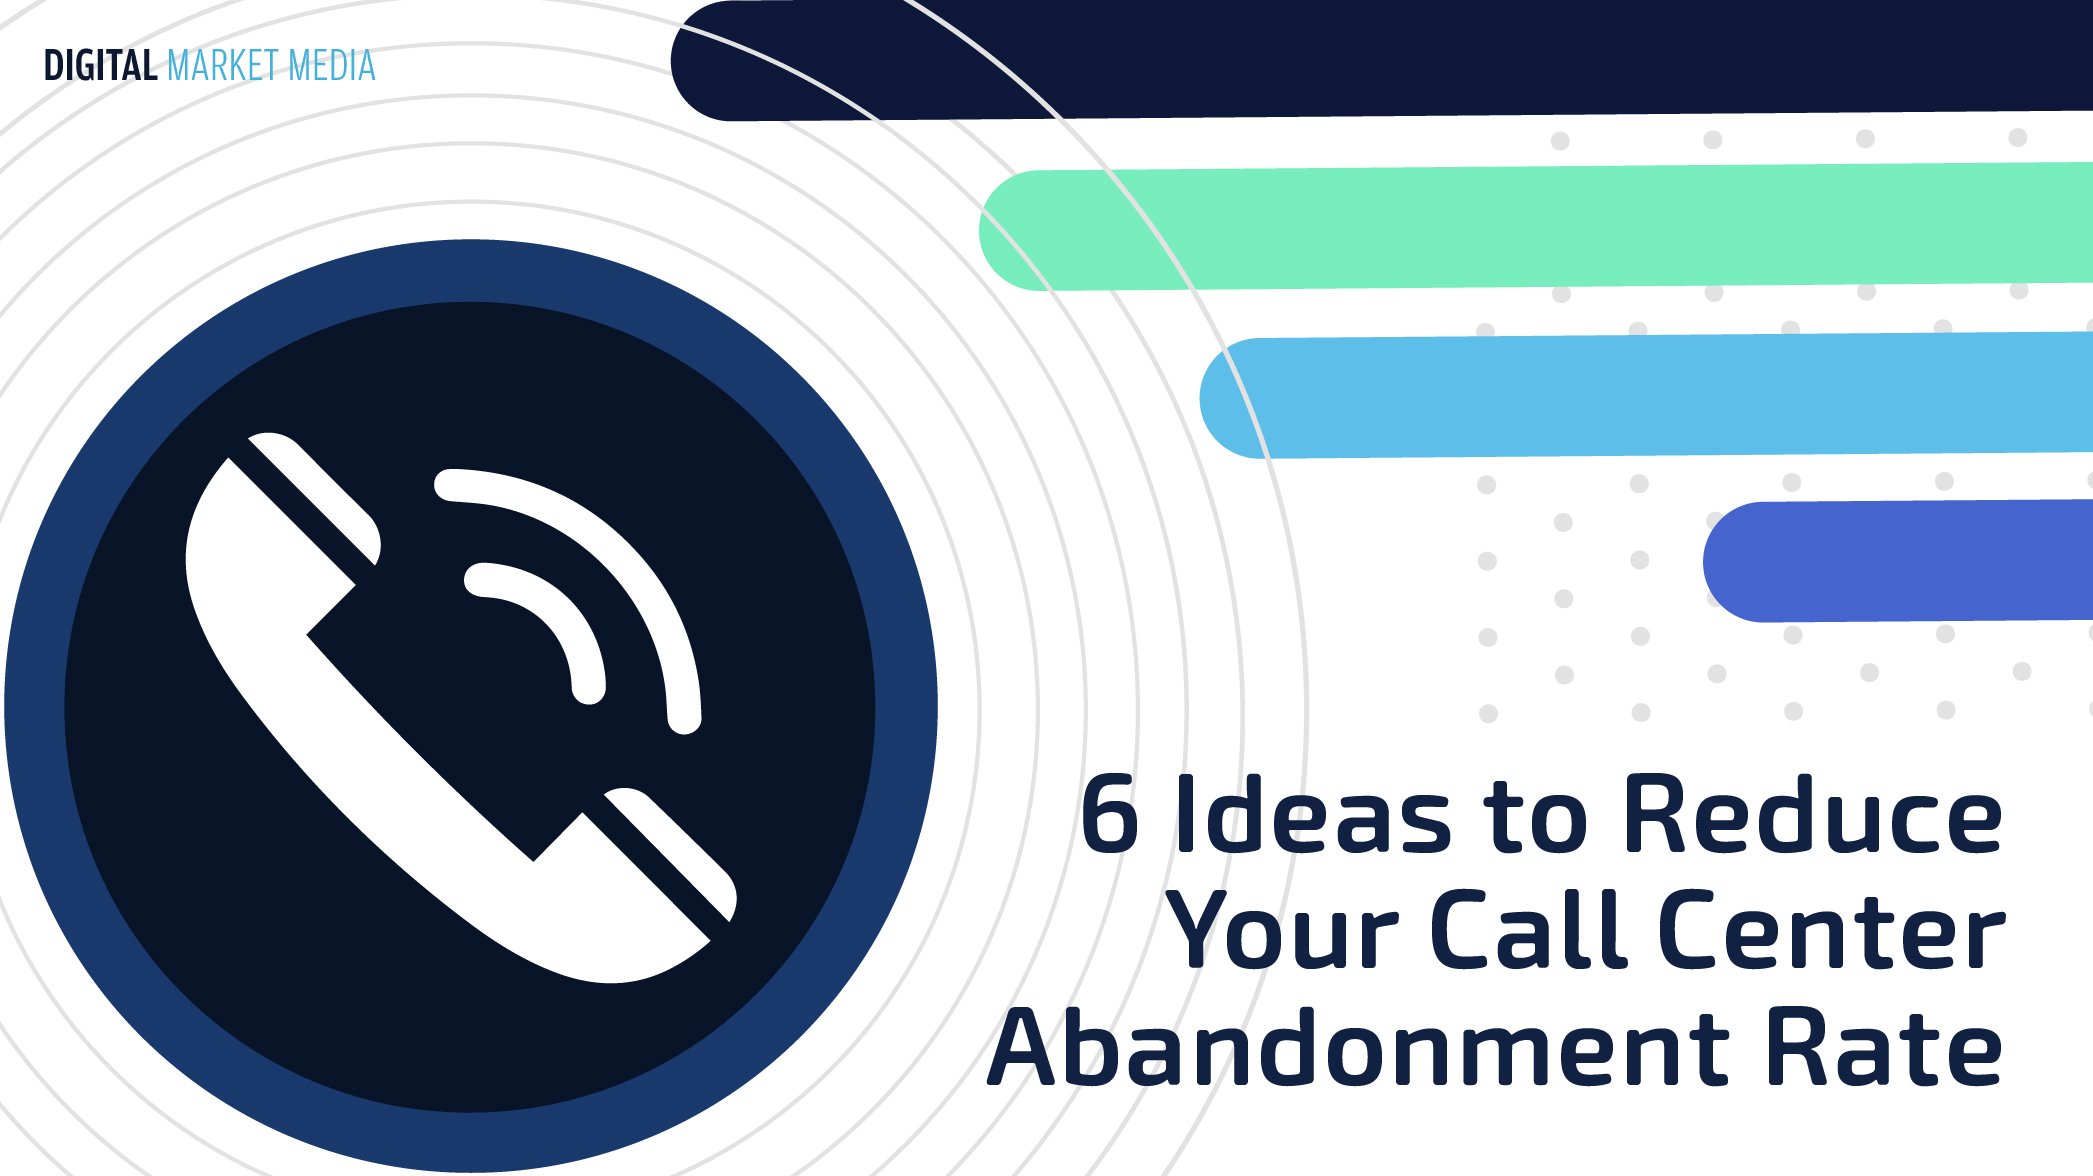 6 Ideas to Reduce Your Call Center Abandonment Rate